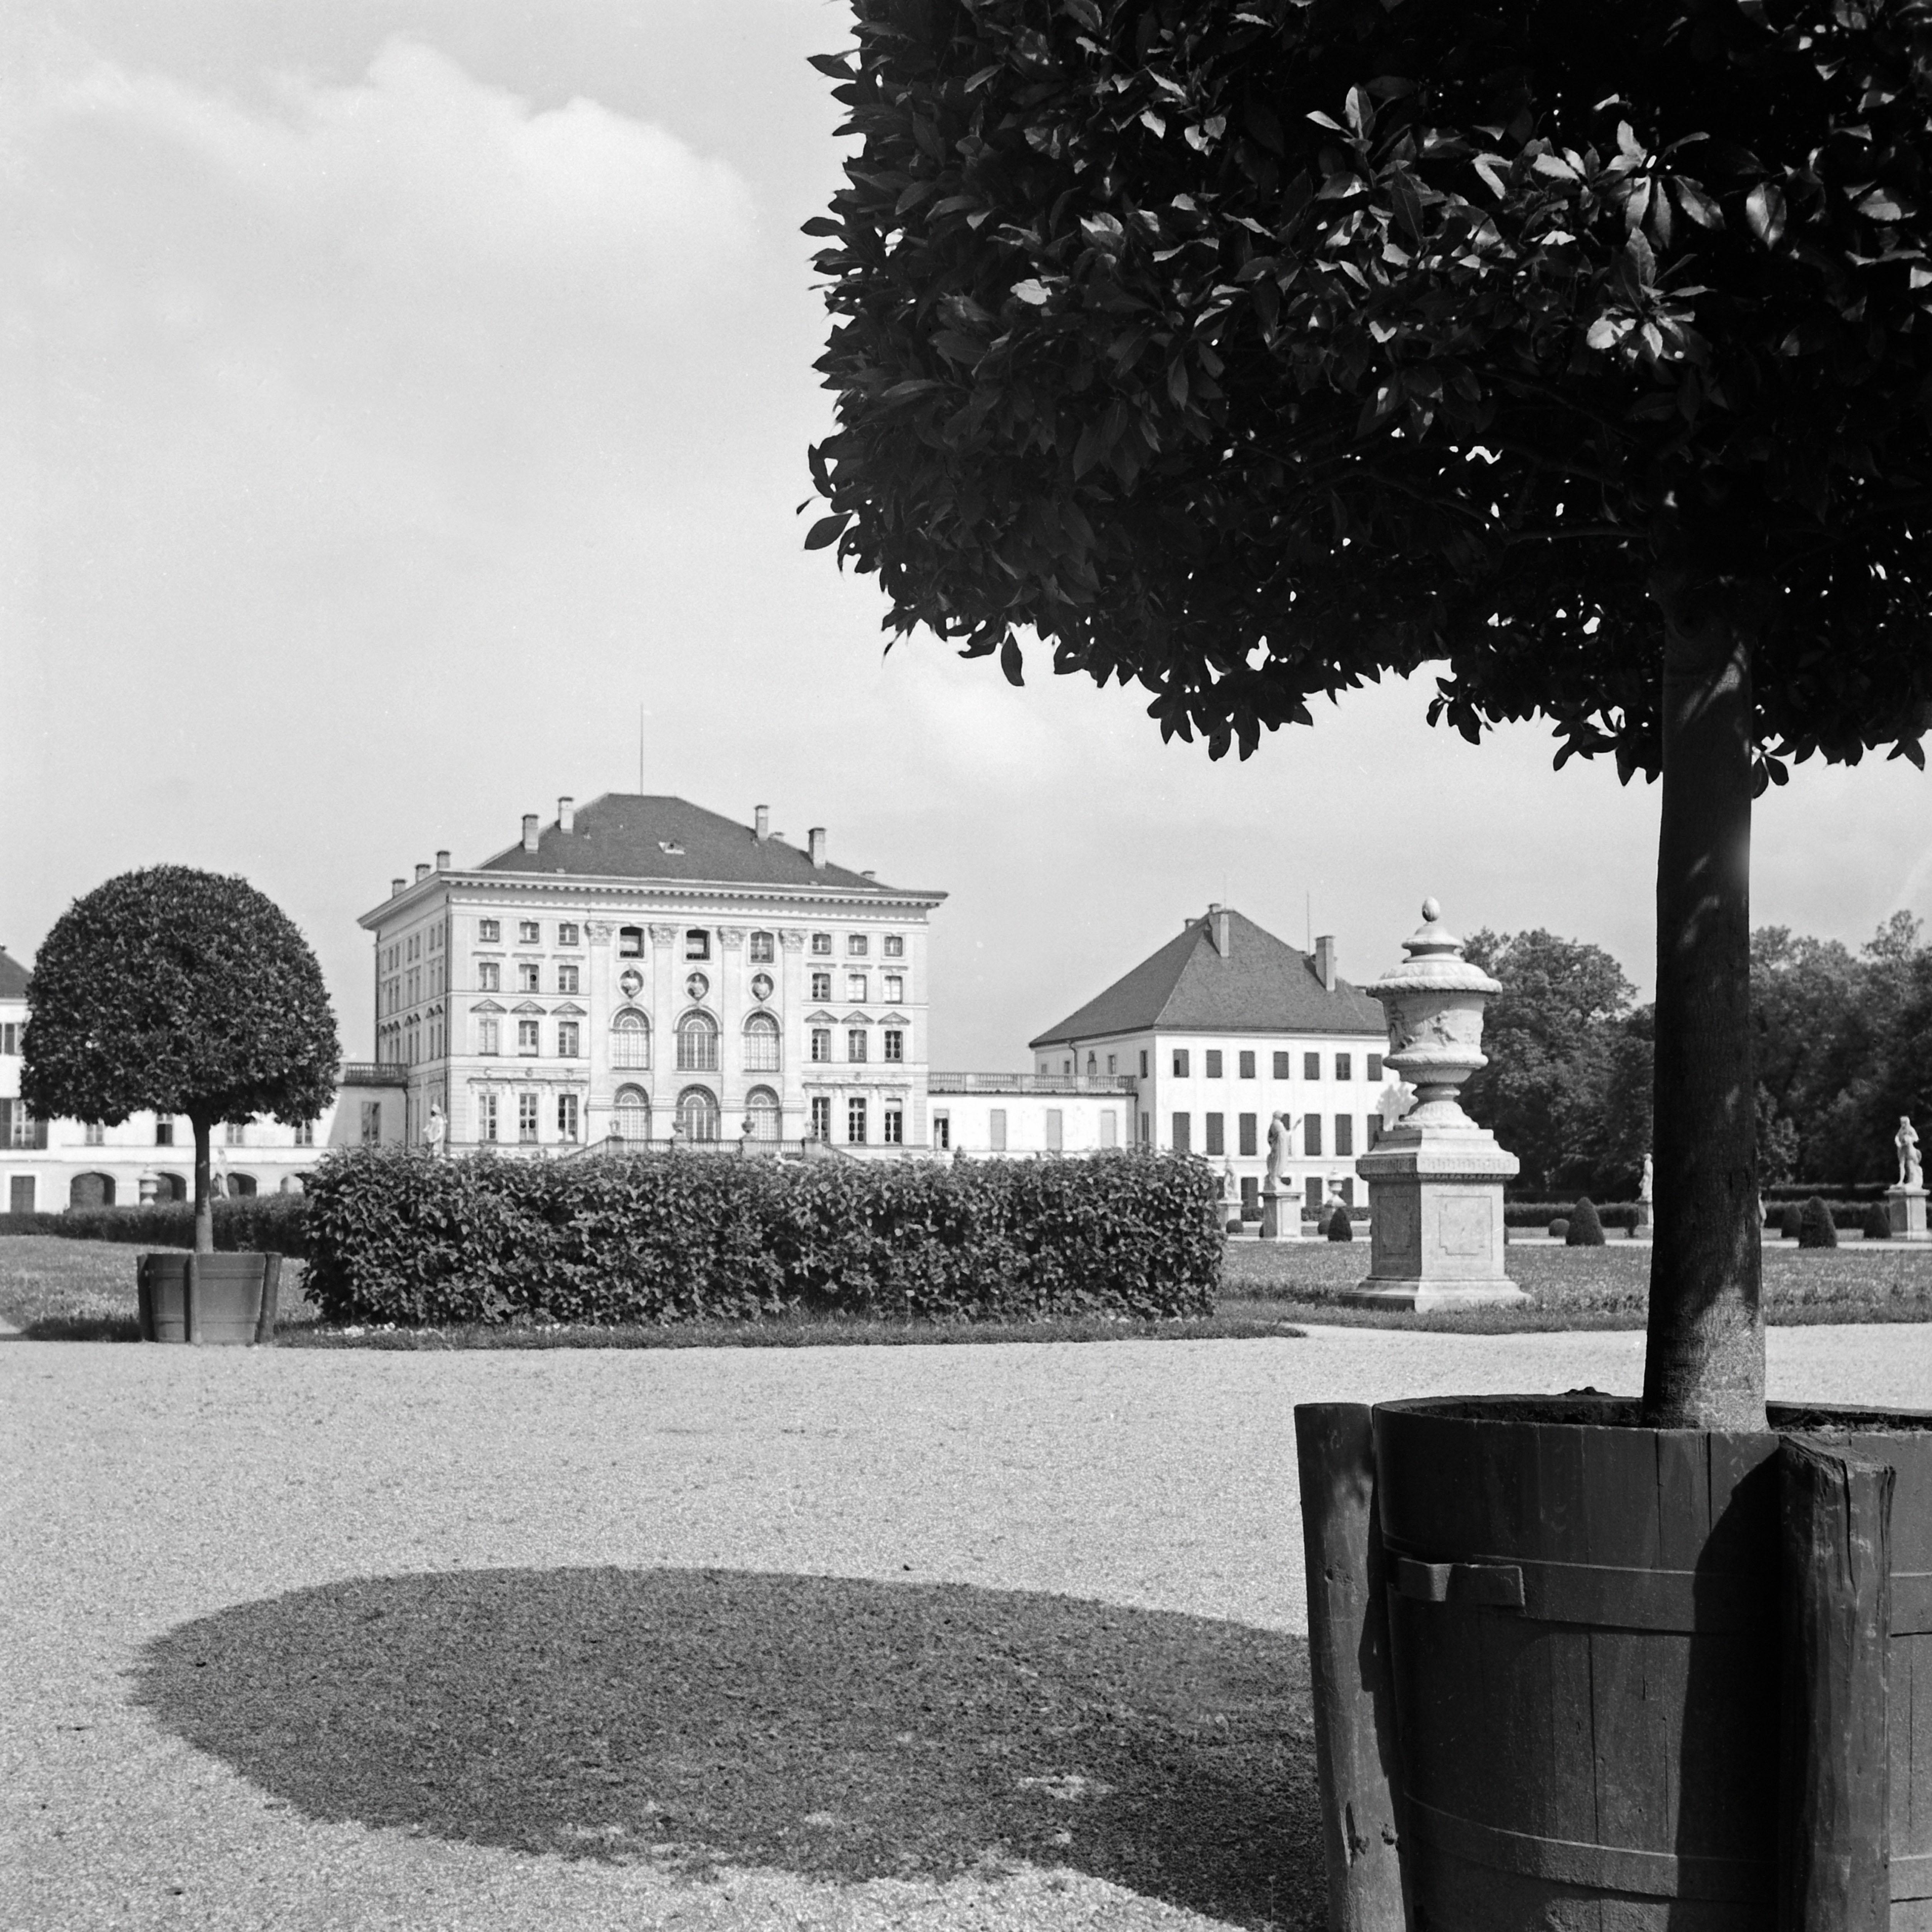 Karl Heinrich Lämmel Black and White Photograph - Park of Nymphenburg castle in the West of Munich, Germany 1937, Printed Later